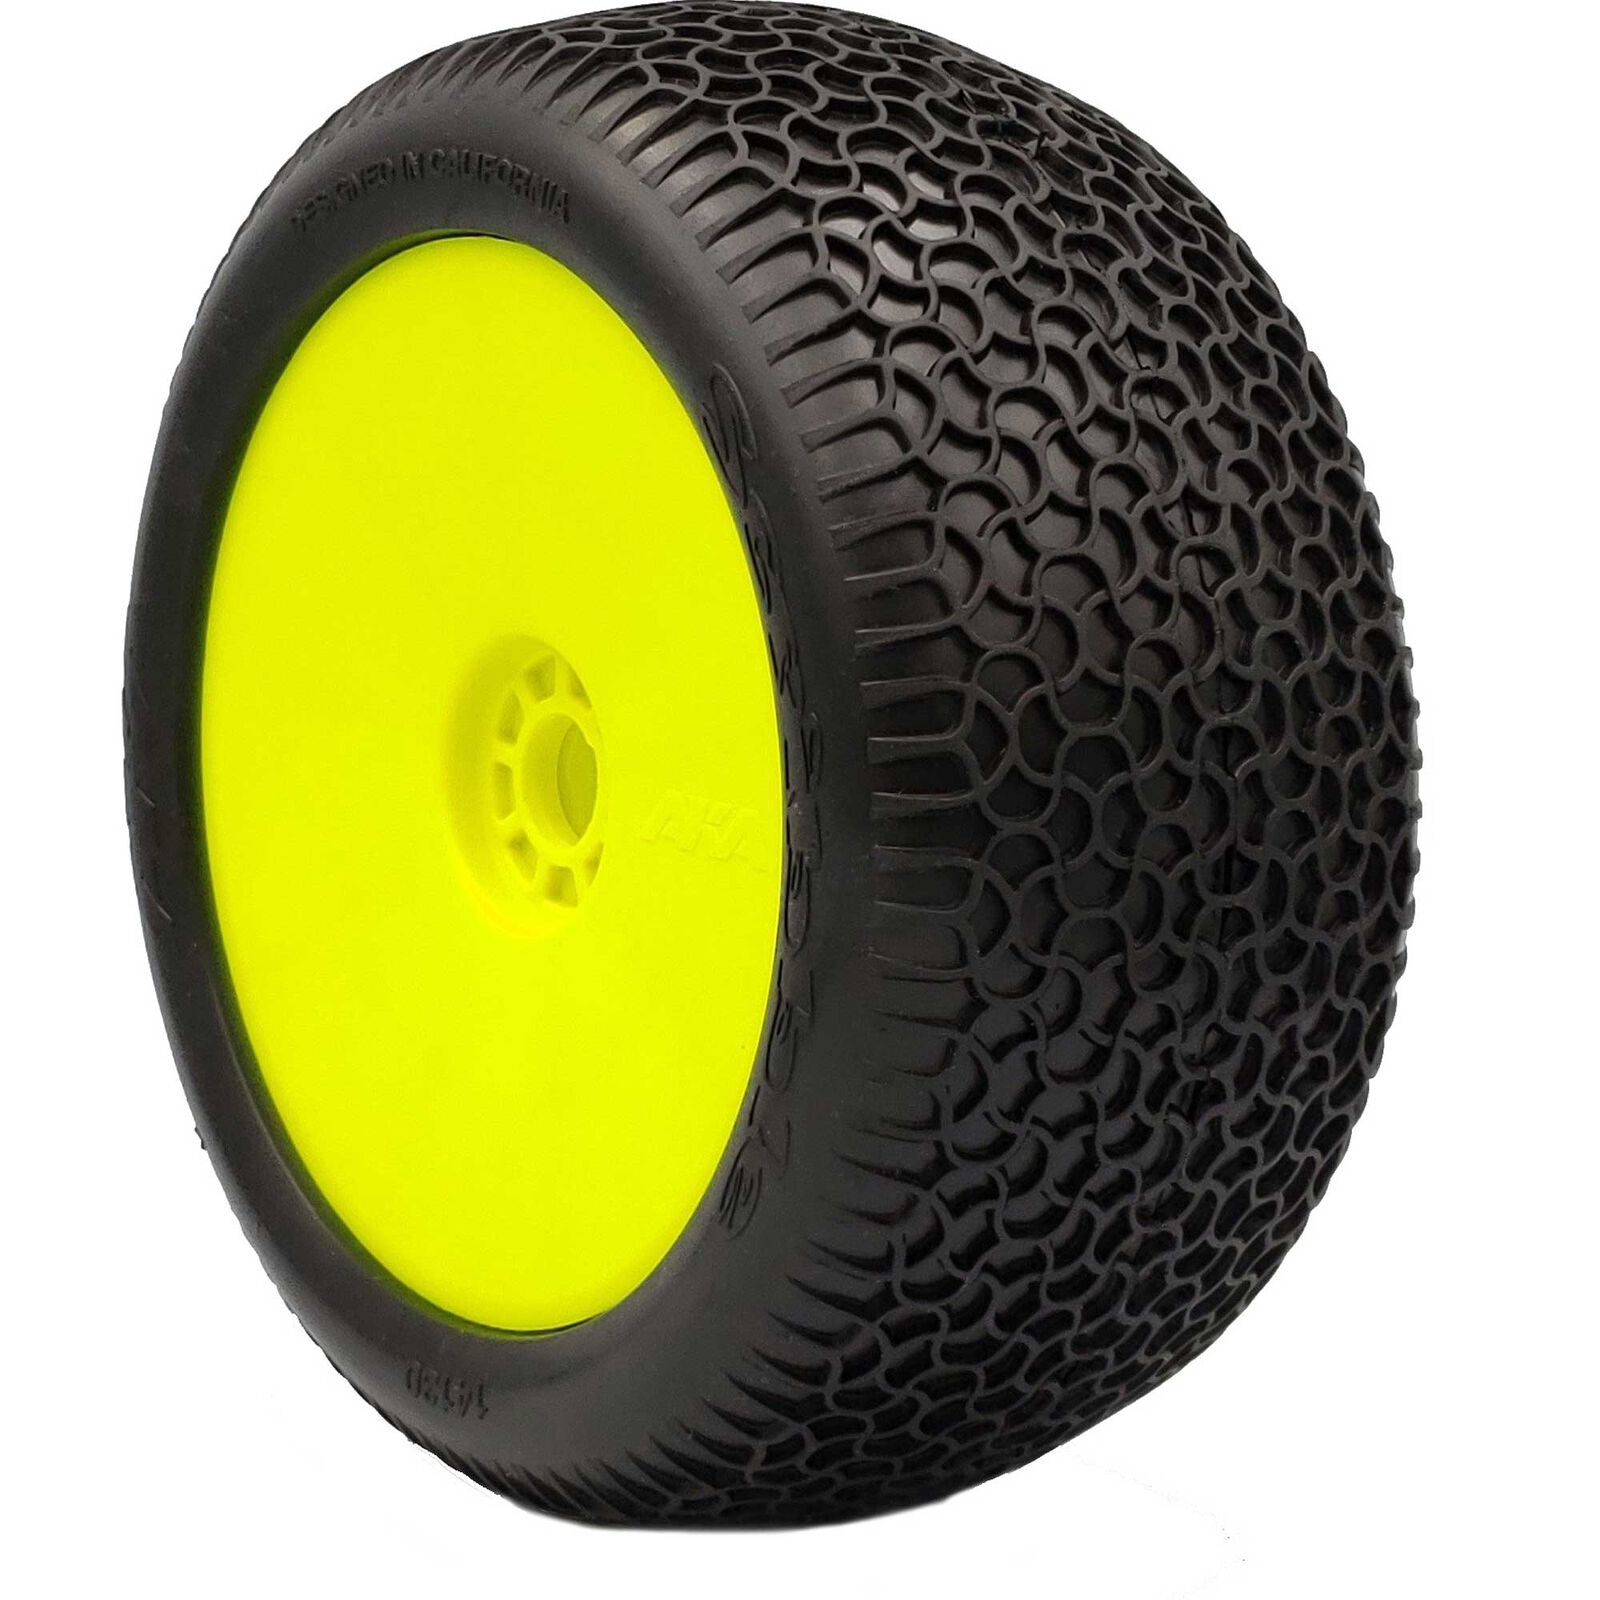 1/8 EVO Scribble Ultra Soft Pre-Mounted Tires, Yellow Wheels (2): Truggy